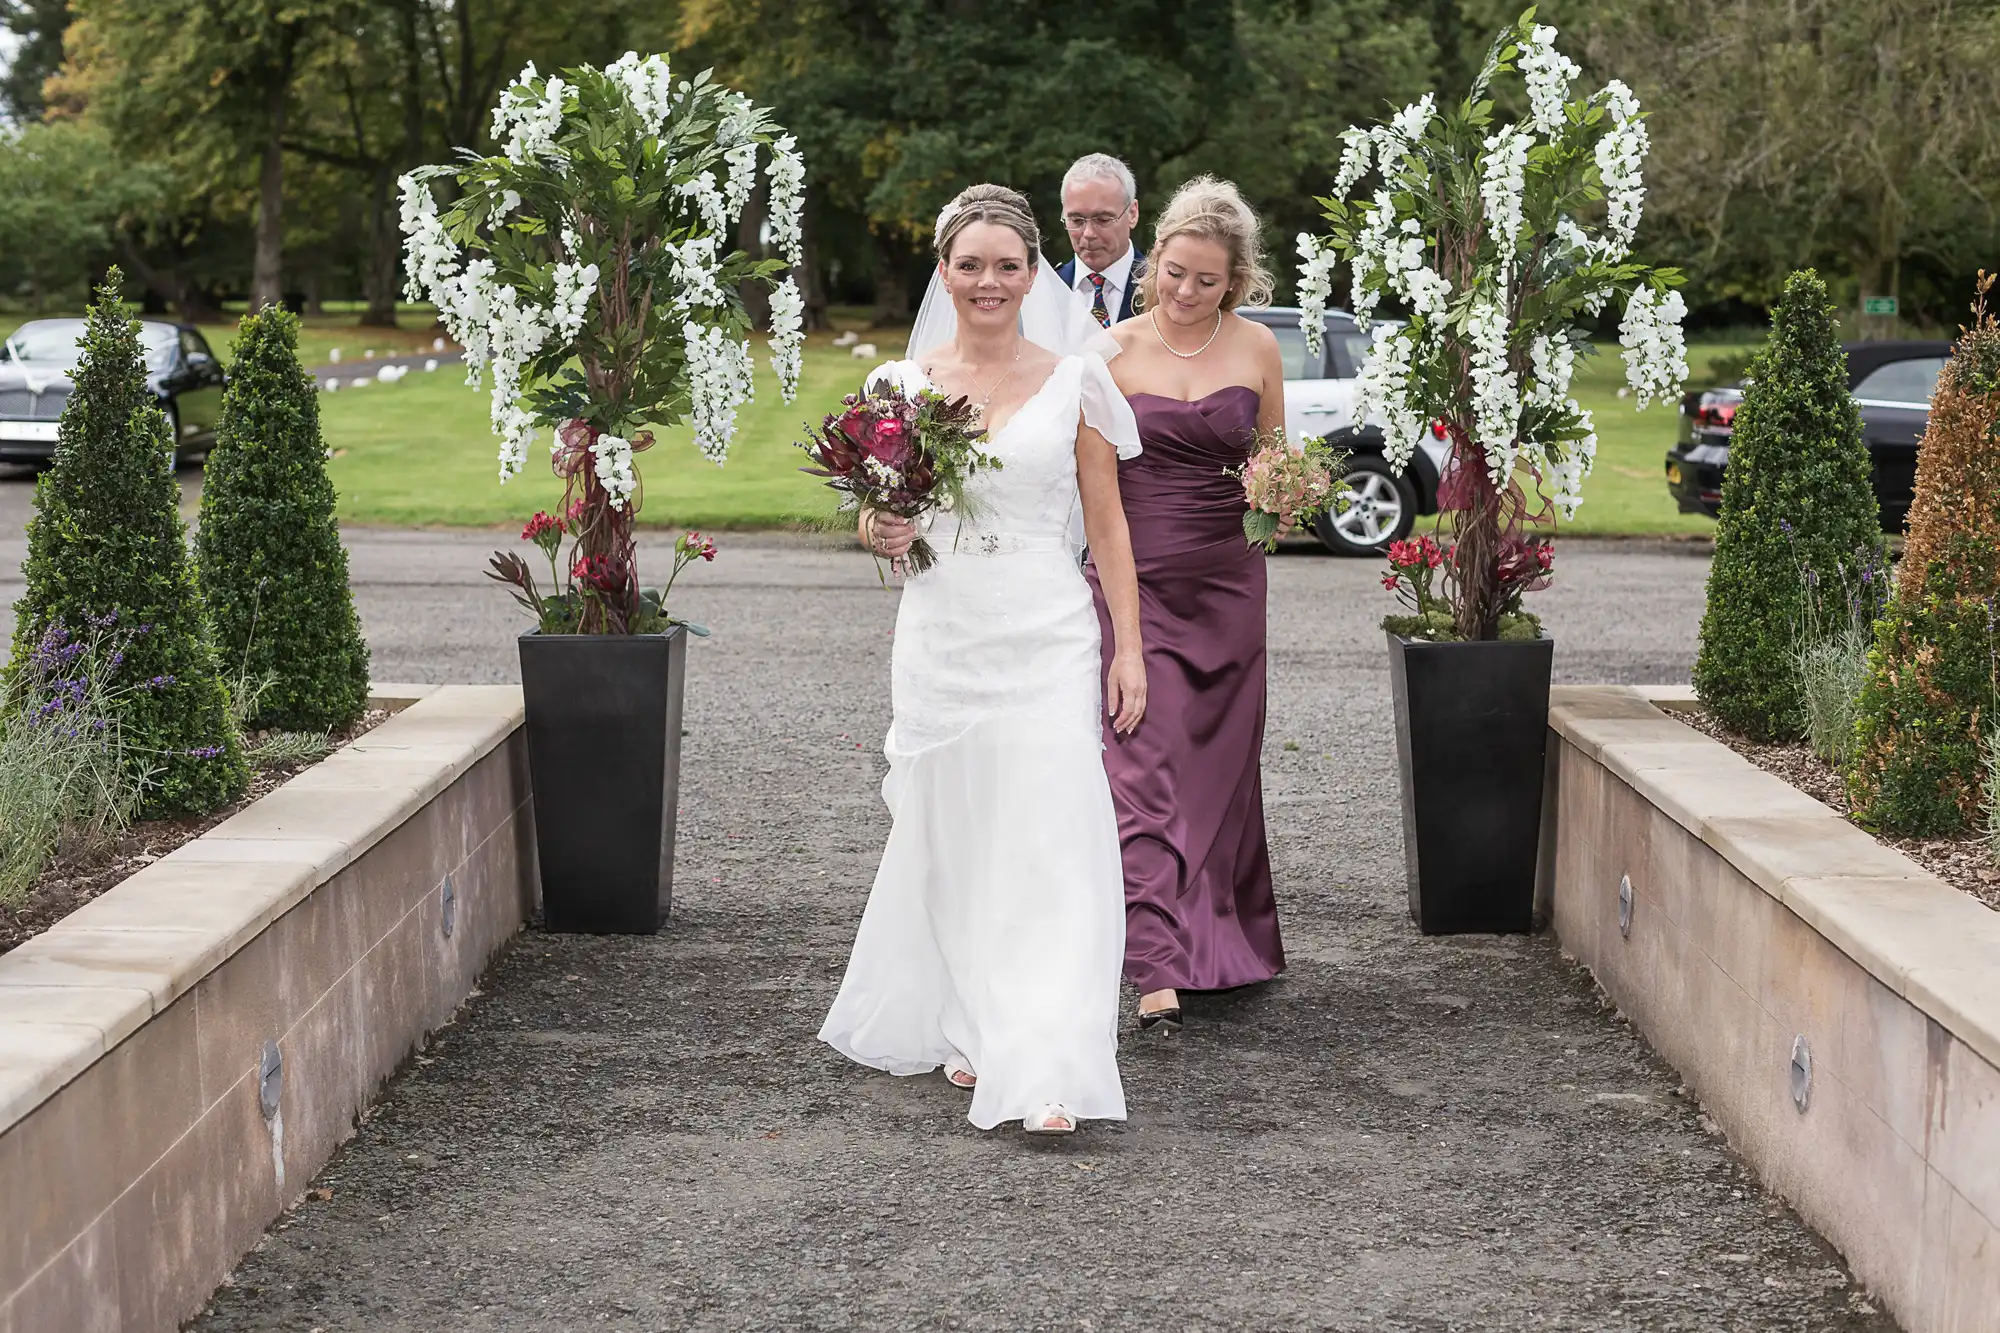 A bride in a white dress and a bridesmaid in a purple gown walking along a garden aisle, with floral arrangements on pedestals and a man in the background.